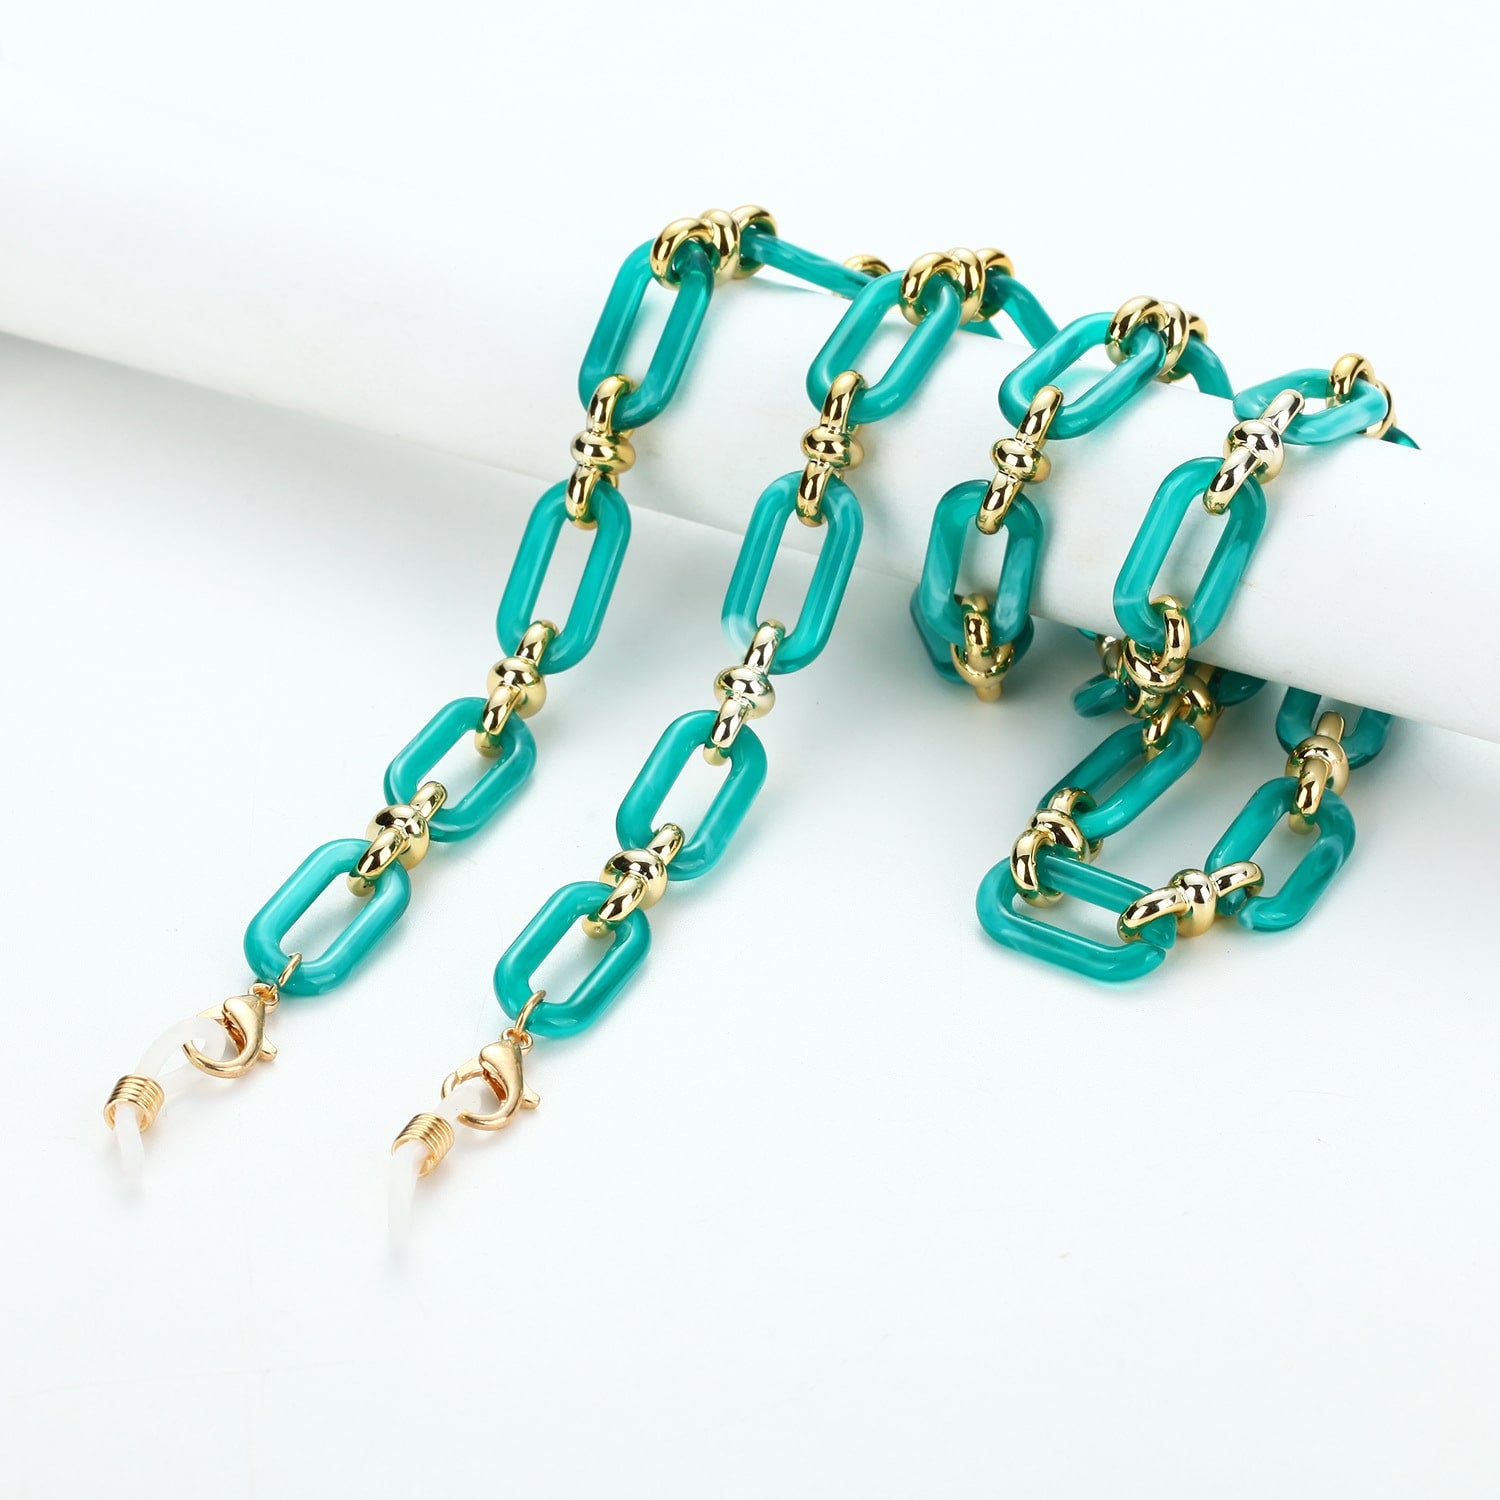 chaine lunette grosse maille bleu turquoise